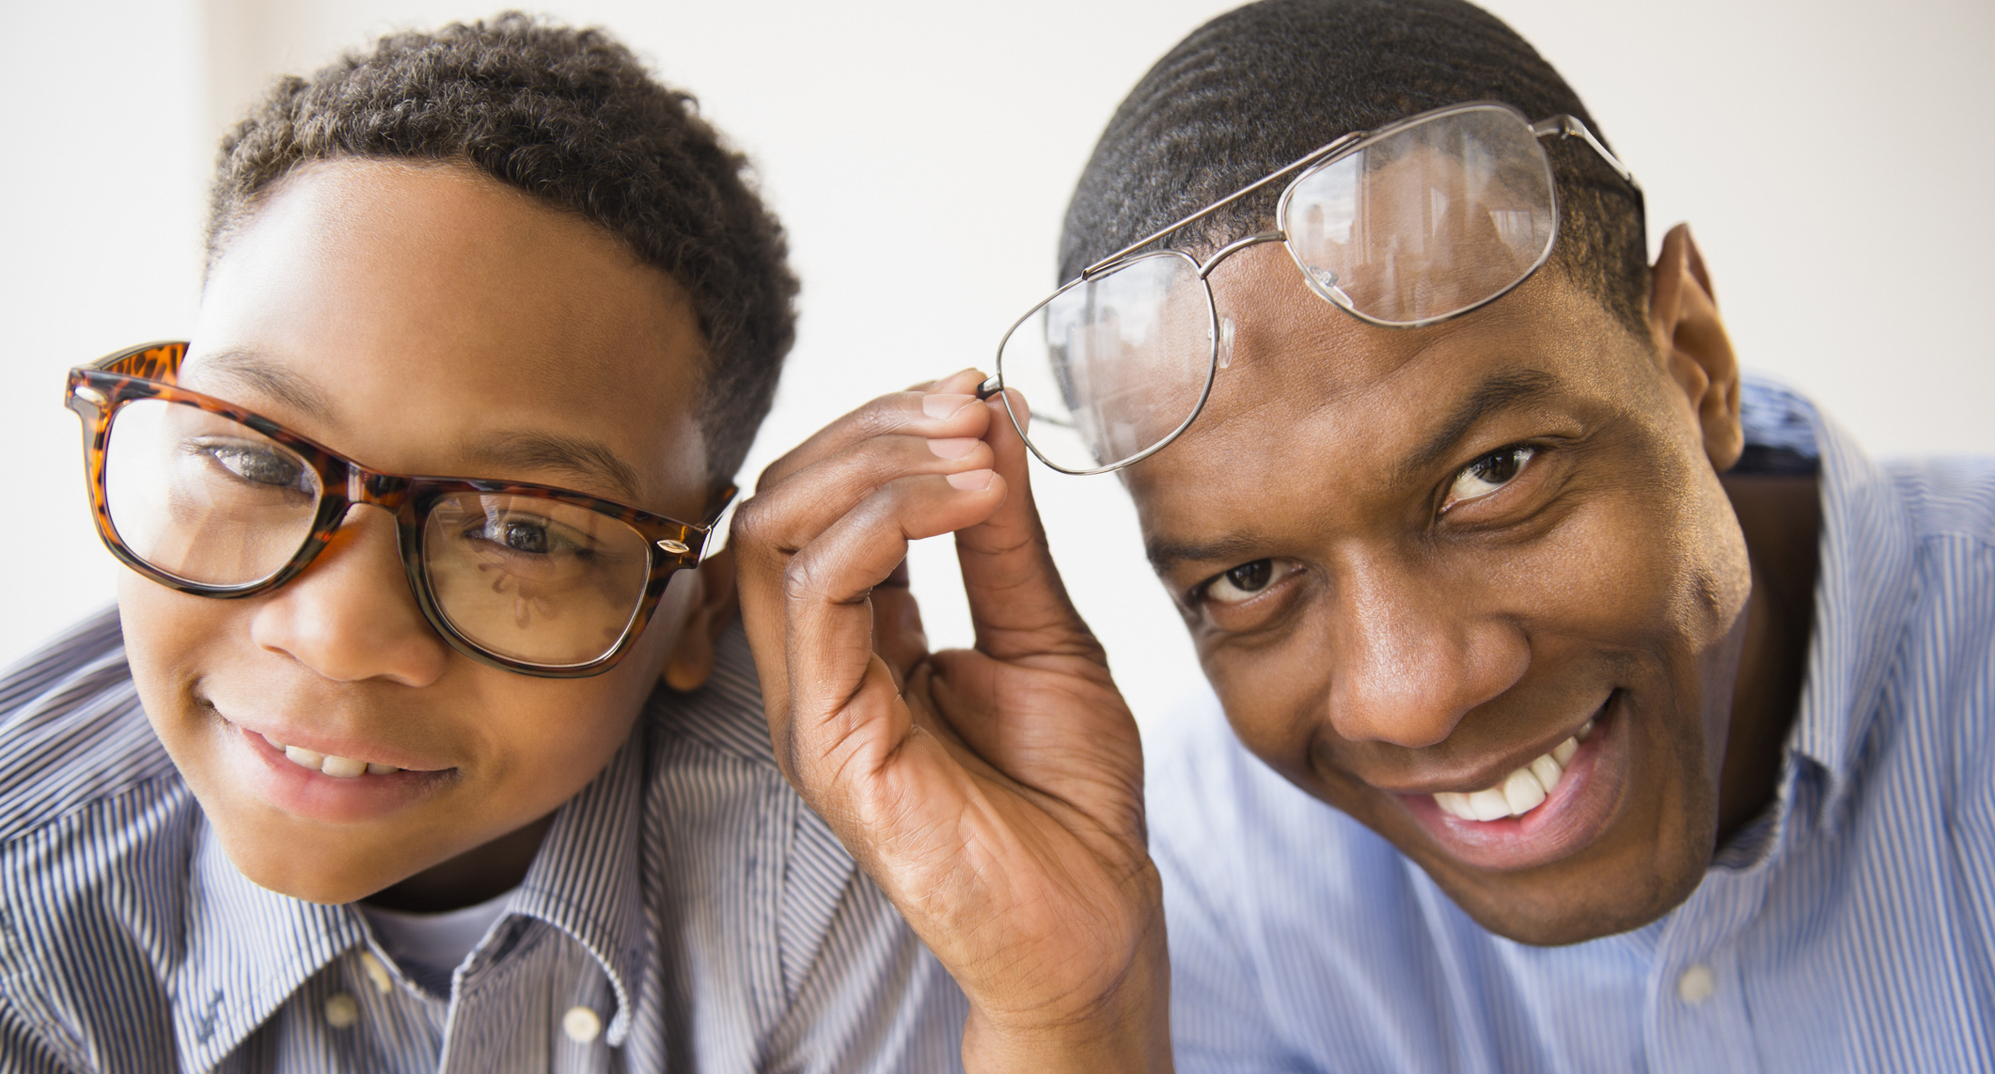 Son and father wearing glasses.